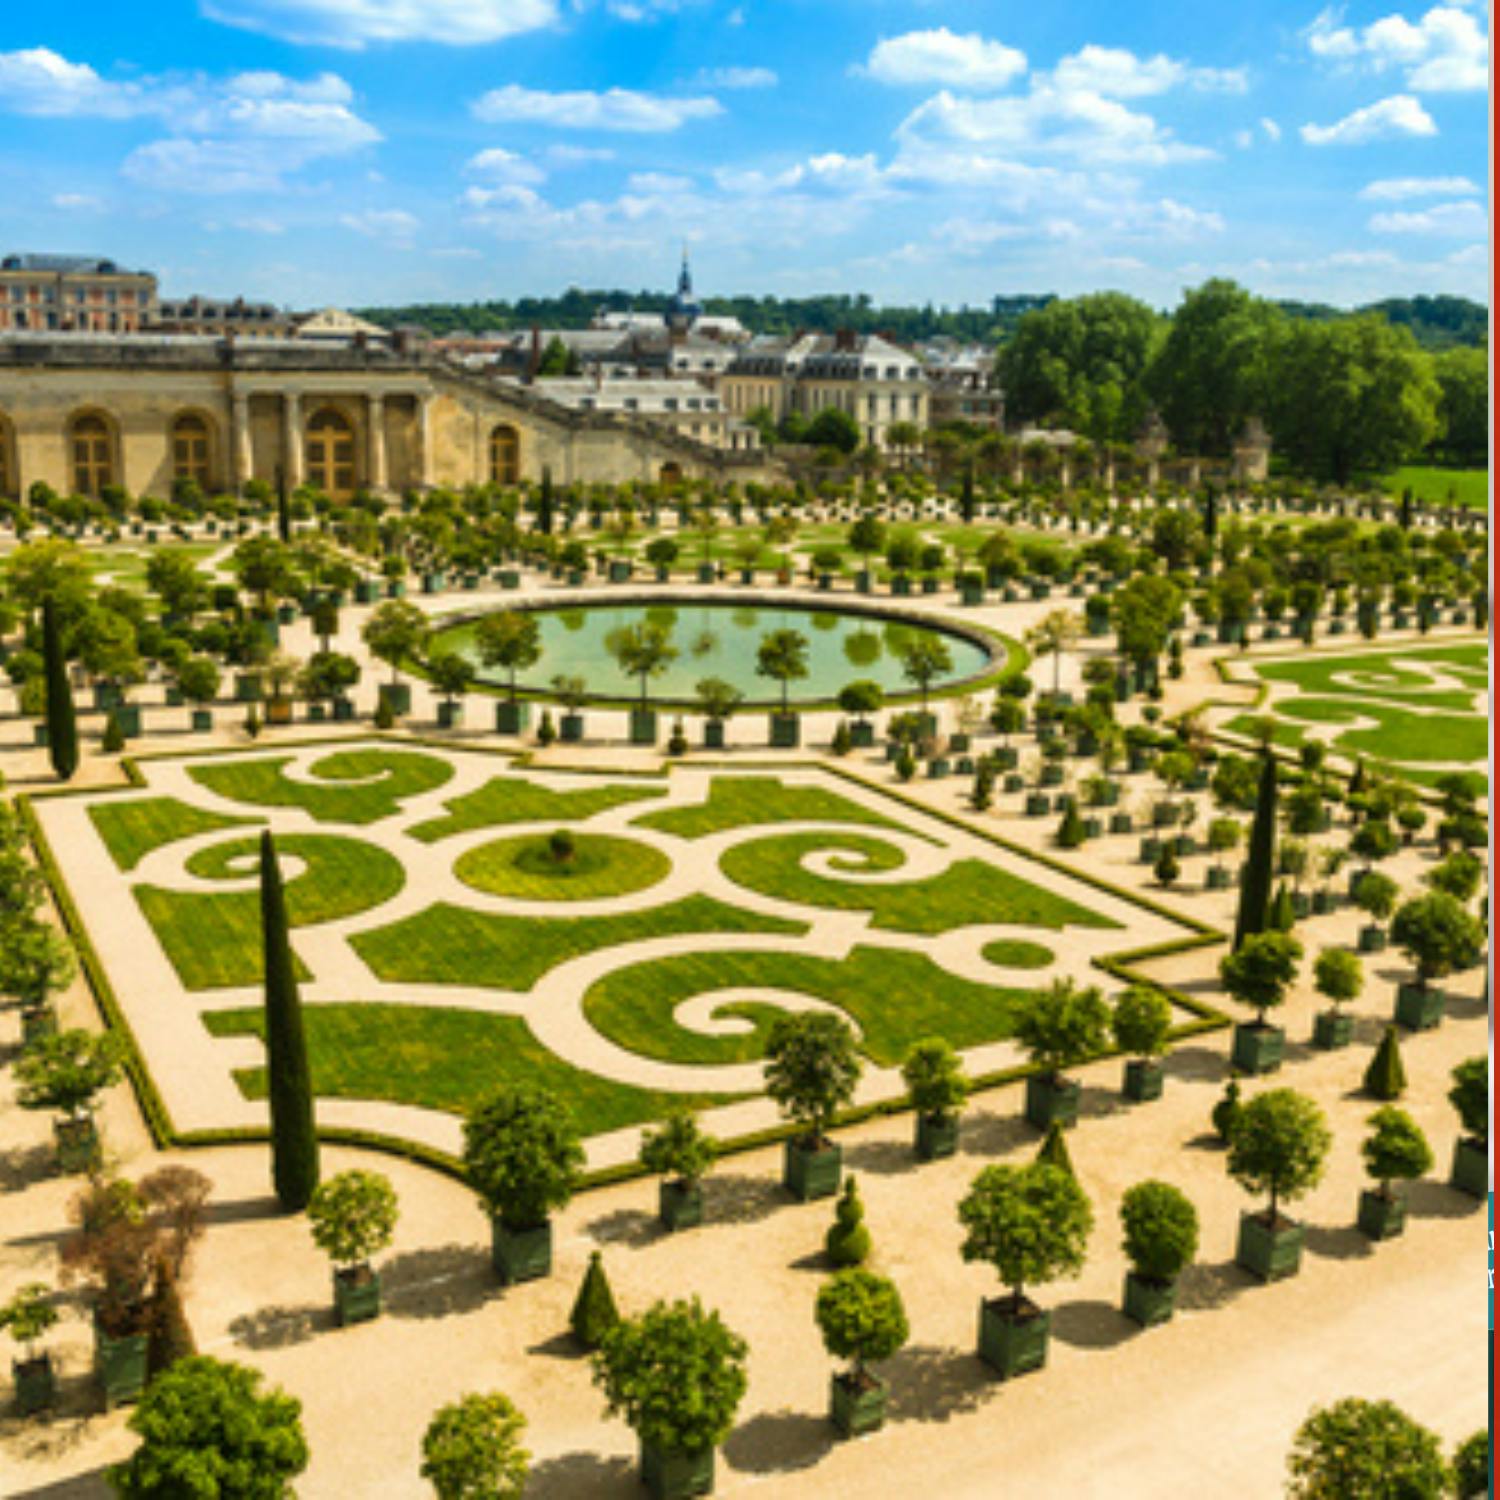 Tales behind the creation of some of the world’s most remarkable gardens